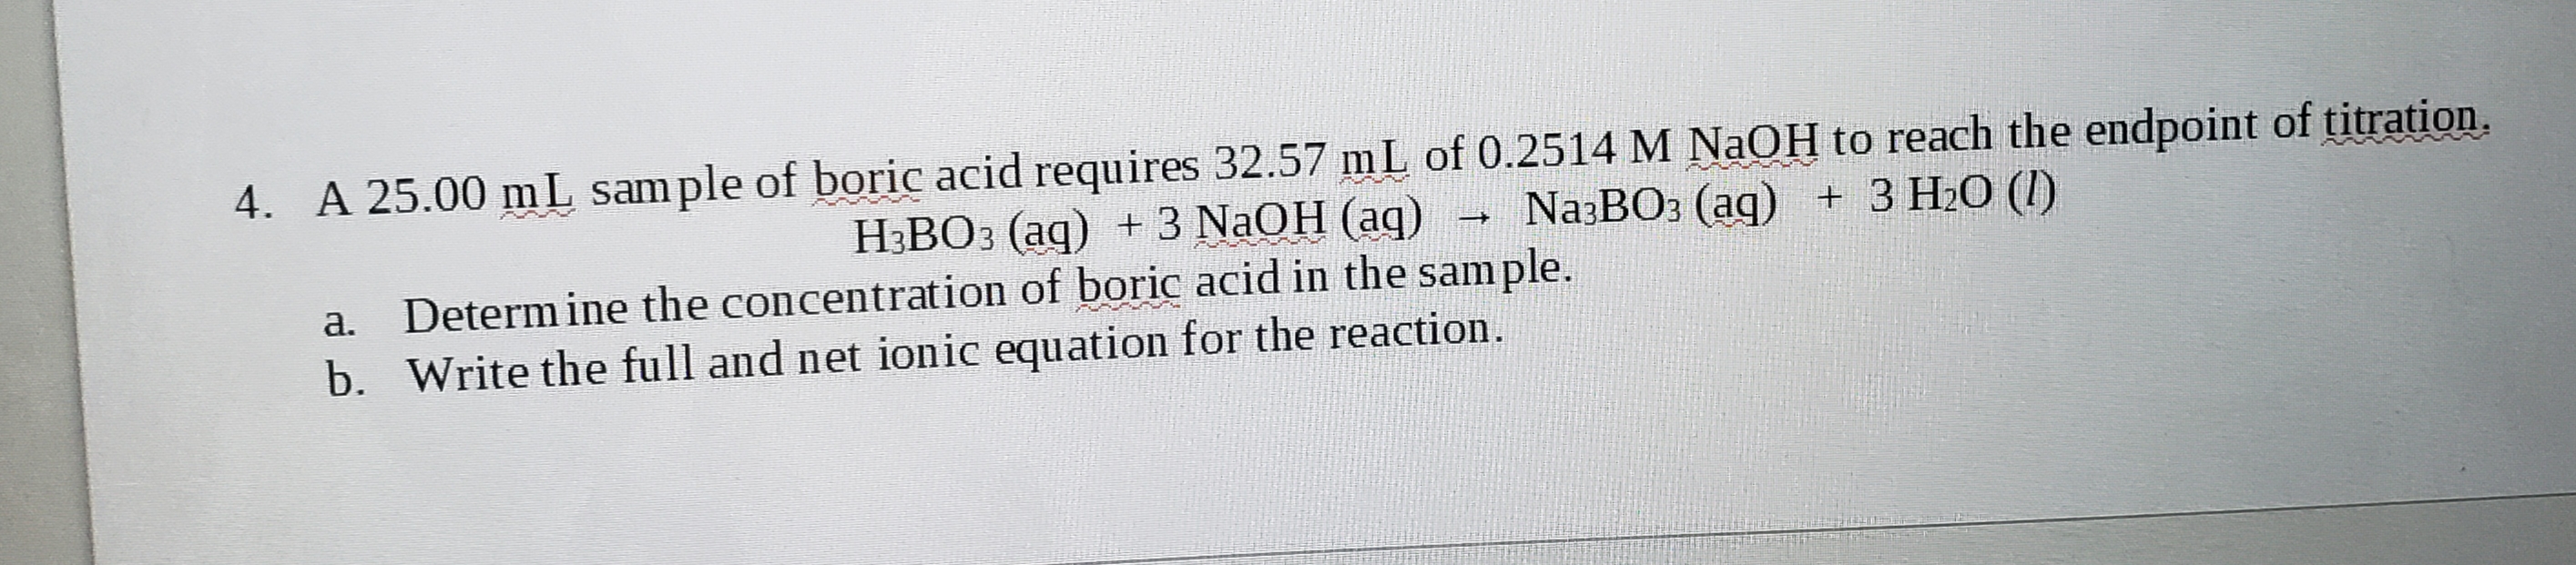 A 25.00 mL sam ple of boric acid requires 32.57 mL of 0.2514 M NaOH to reach the endpoint of titration.
Na:BO: (ag) + 3 H2O (I)
H3BO3 (ag) +3 NAOH (aq)
a. Determinë the concentration of boric acid in the sample.
b. Write the full and net ionic equation for the reaction.
